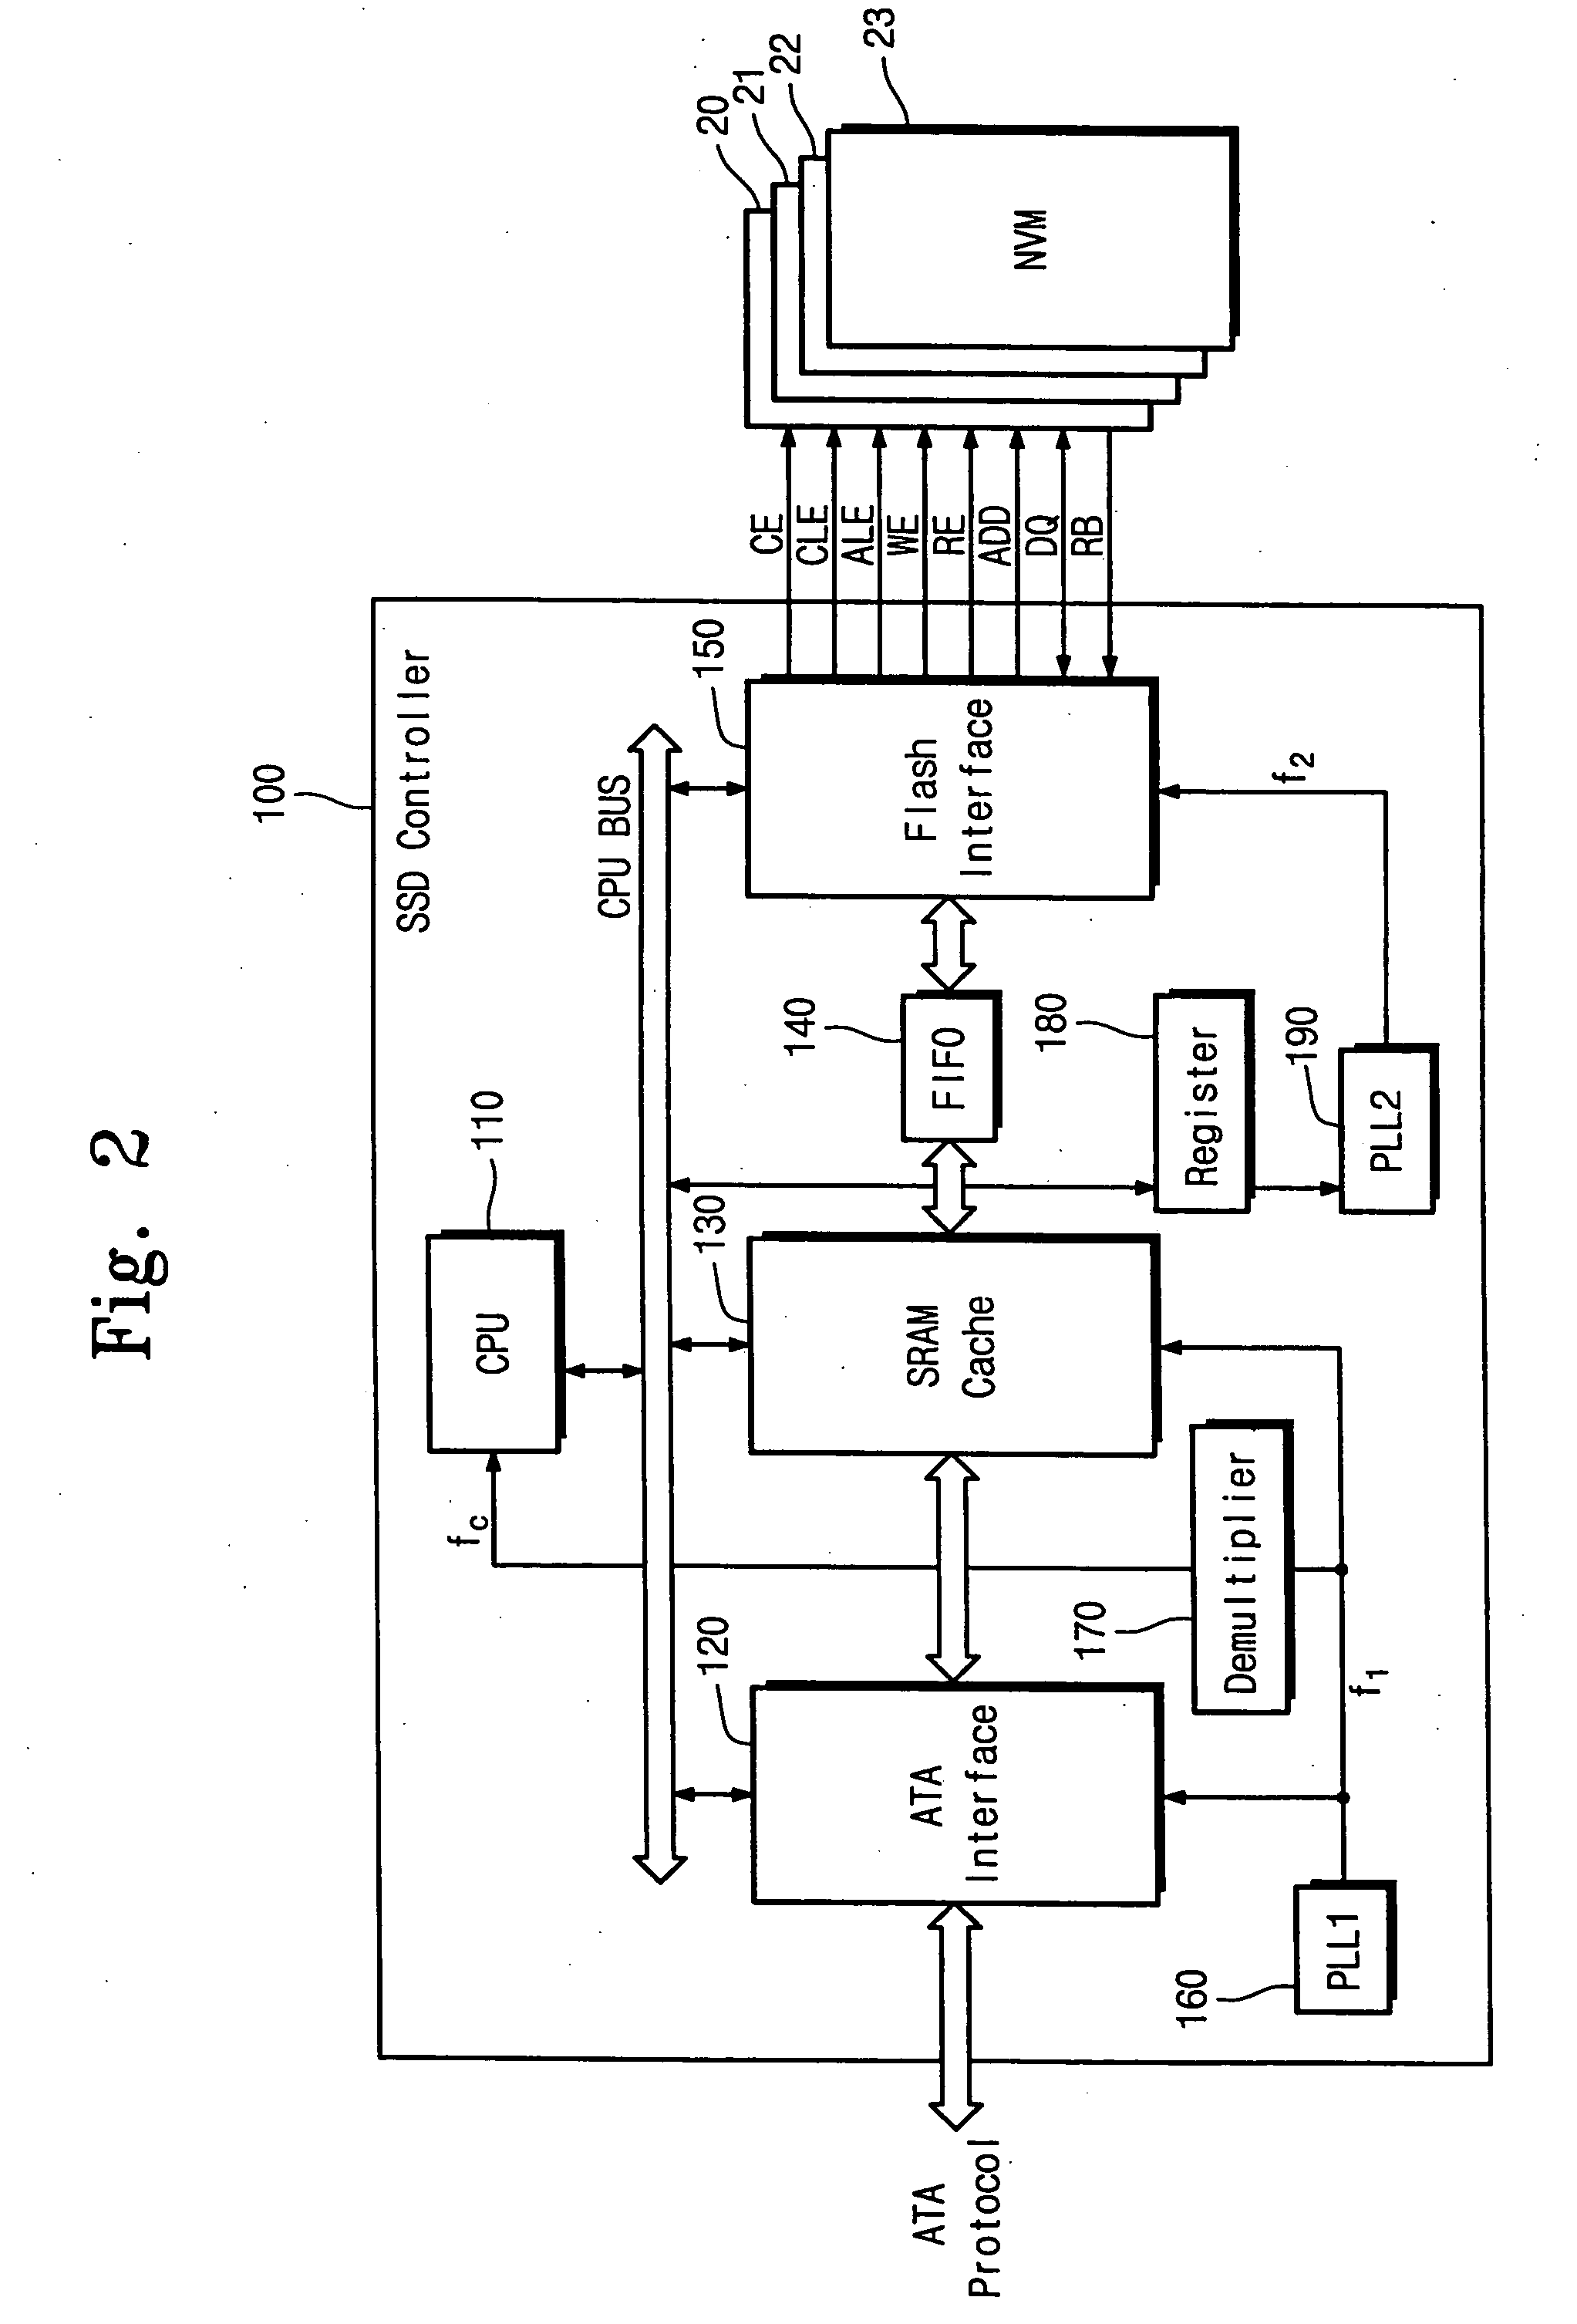 Semiconductor solid state disk controller